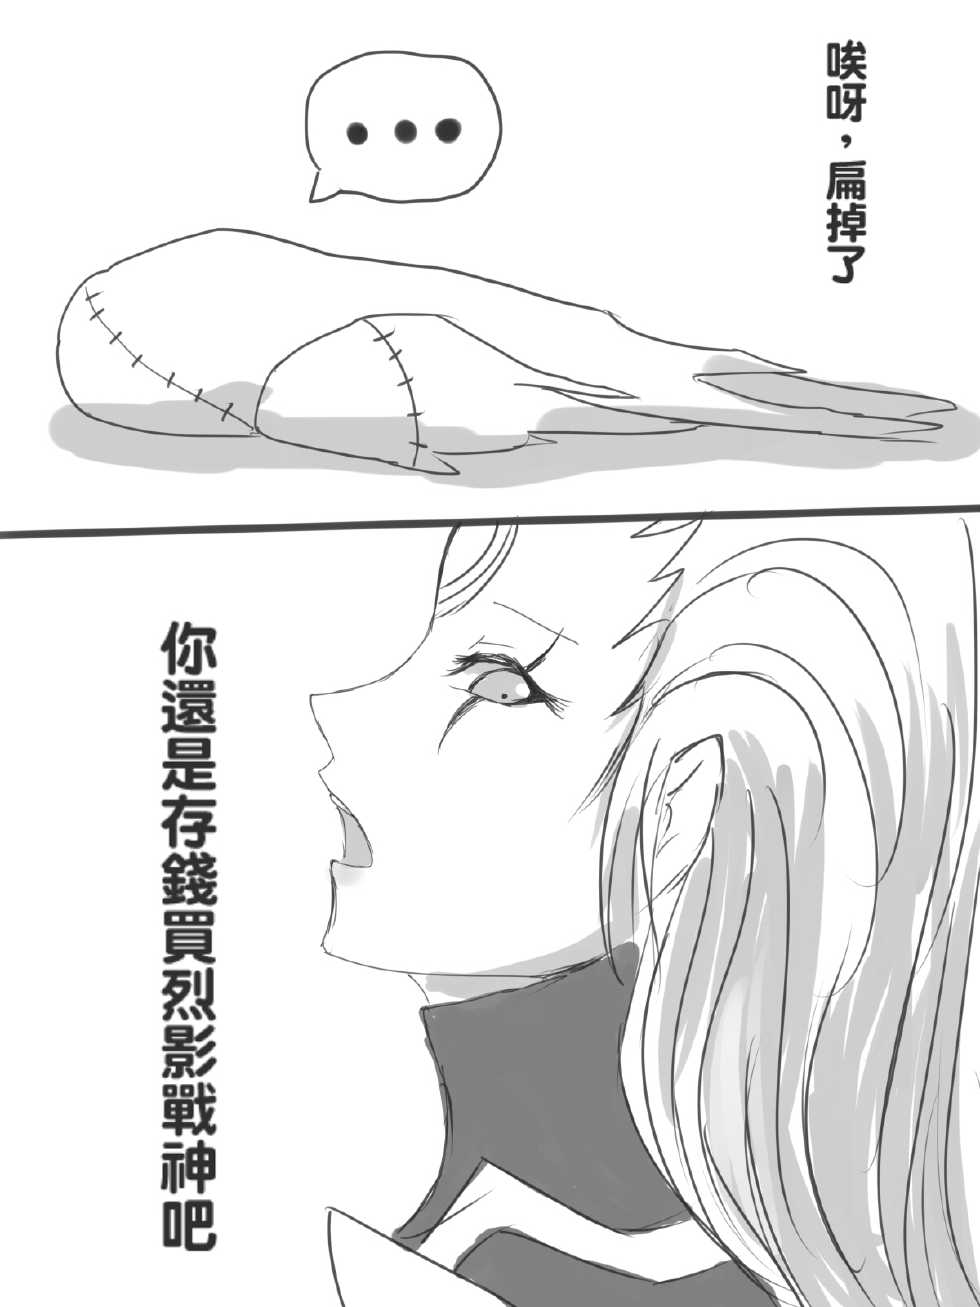 (Kumiko) JG trifles 2 (League of Legends) [Chinese] - Page 7